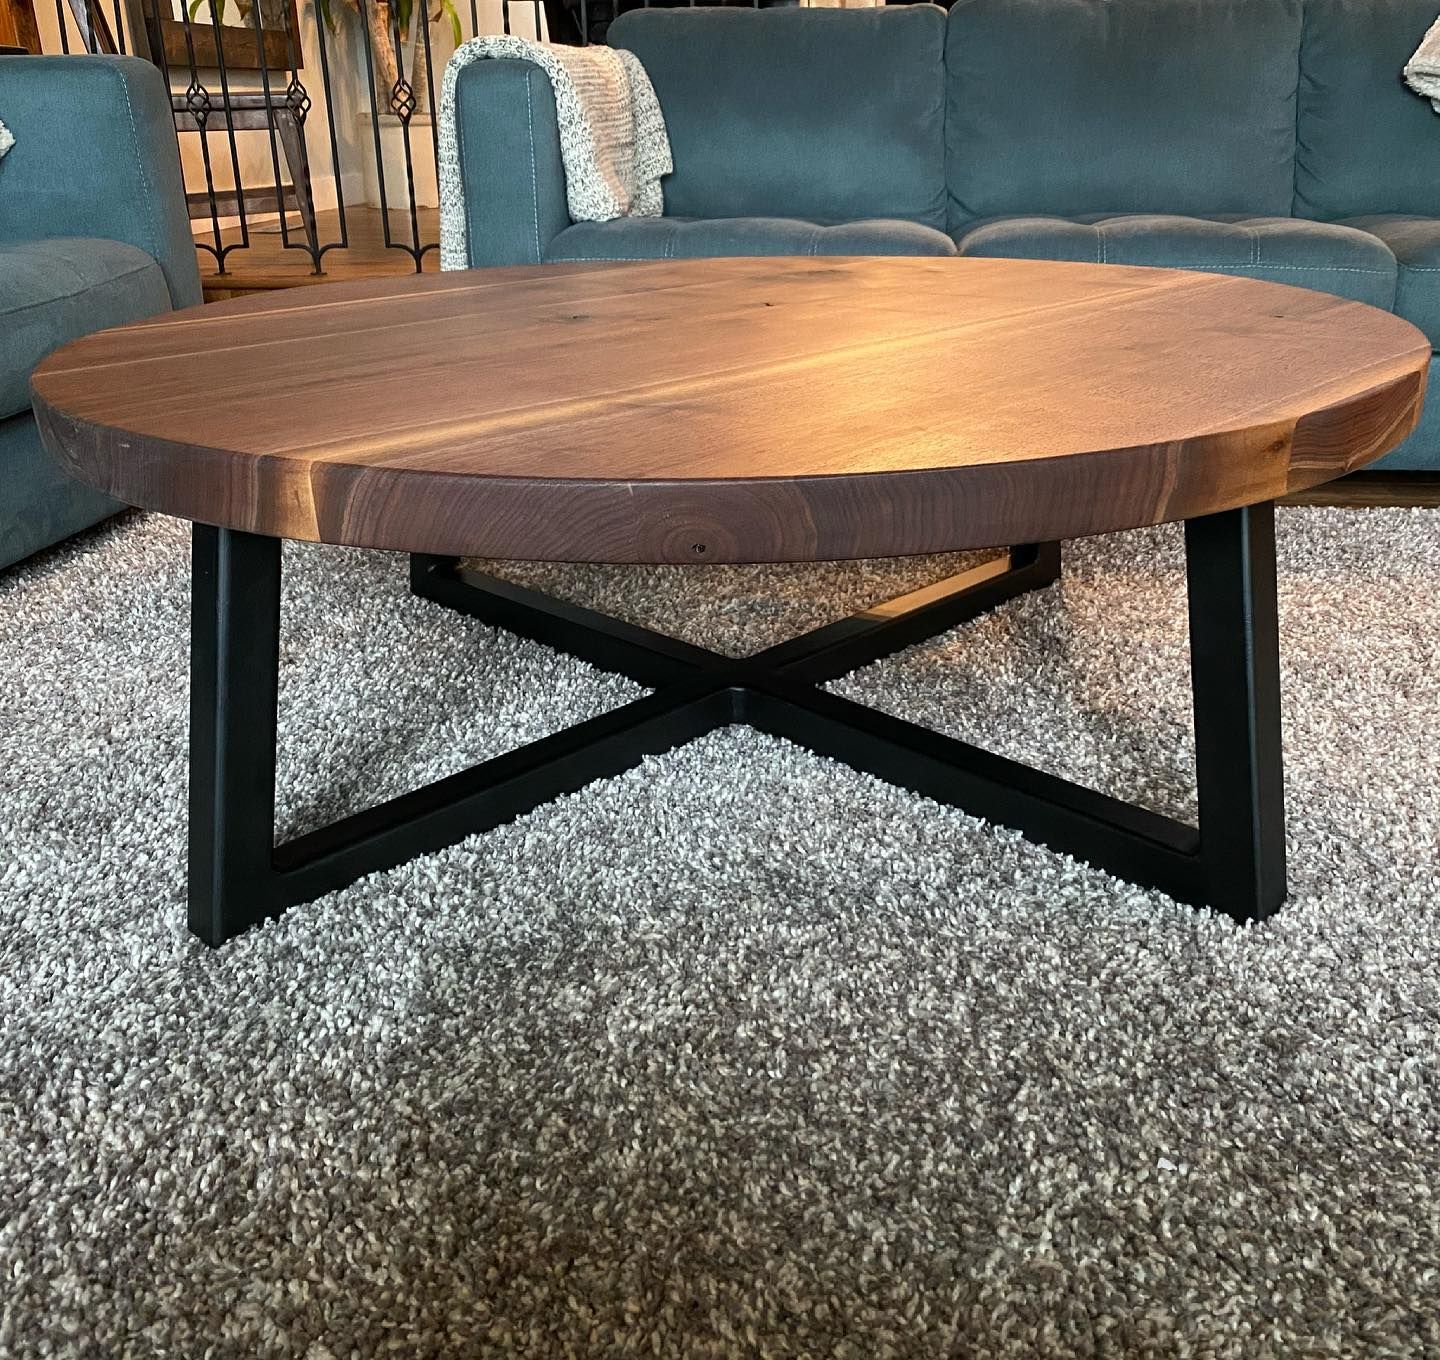 4ft Round Black Walnut Coffee Table – Woodify Canada Intended For Walnut Coffee Tables (View 19 of 20)